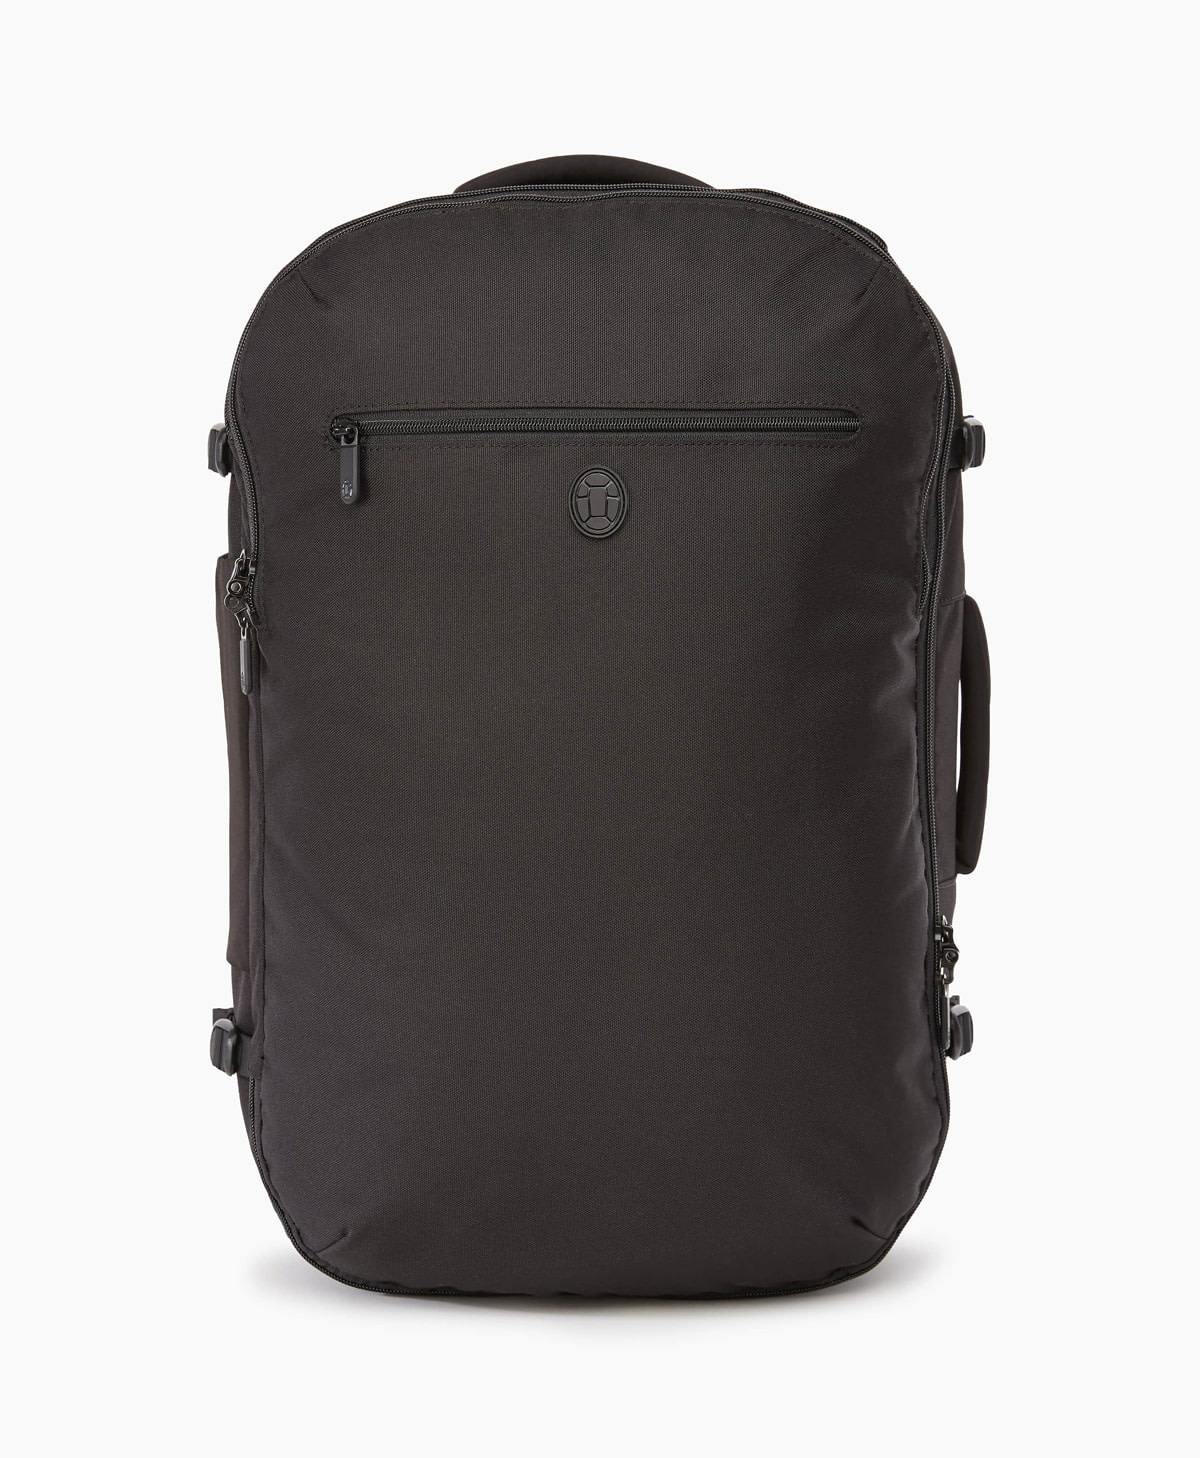 Best Carry-On Travel Backpack